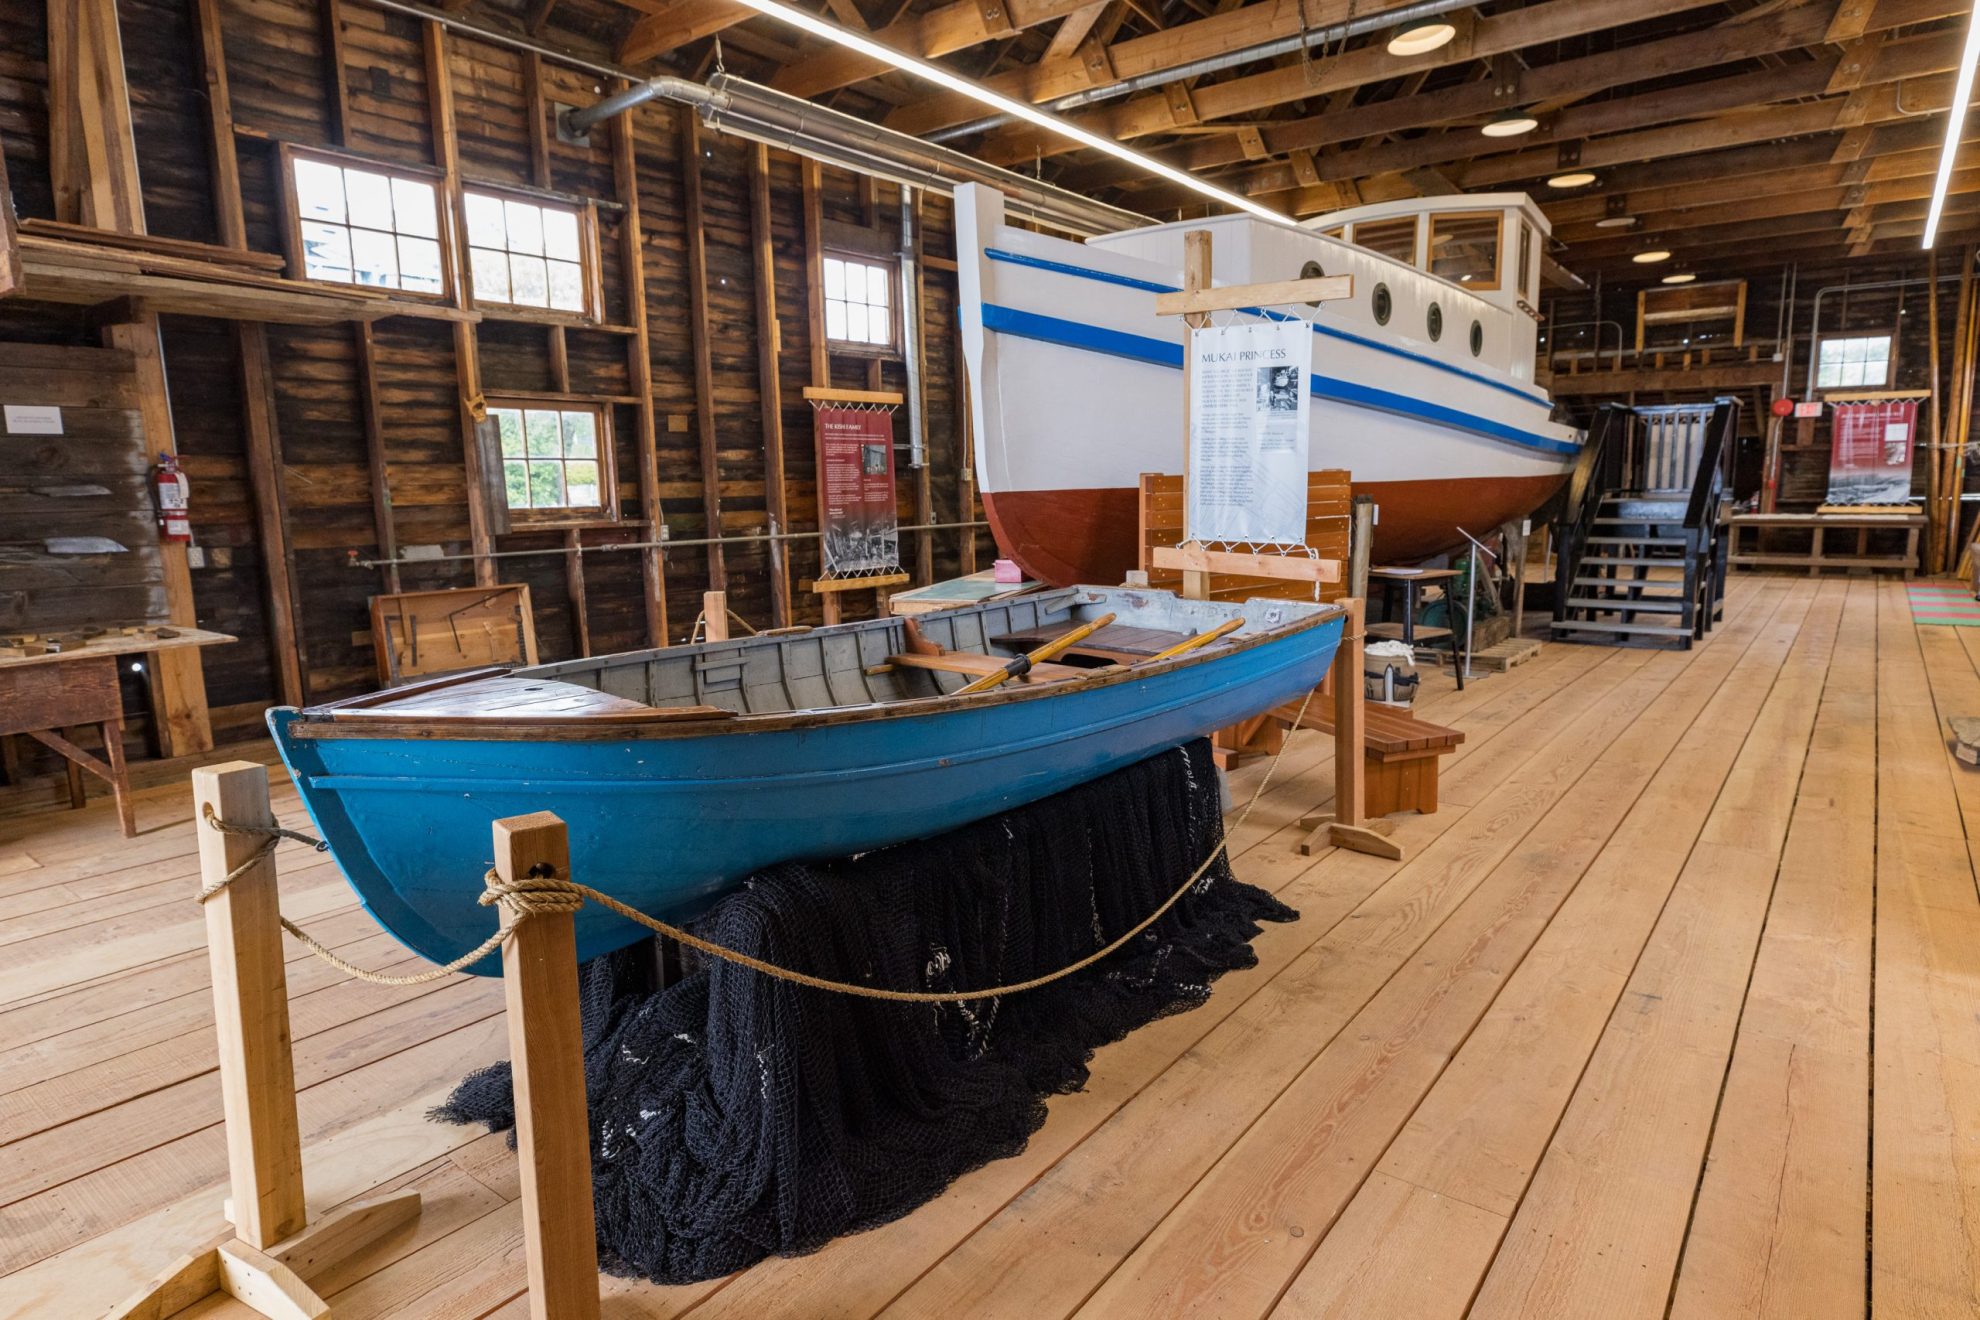 Smaller light blue boat displayed in front of a larger wooden boat that is white with a light blue stripe and red bottom, displayed inside a wooden building